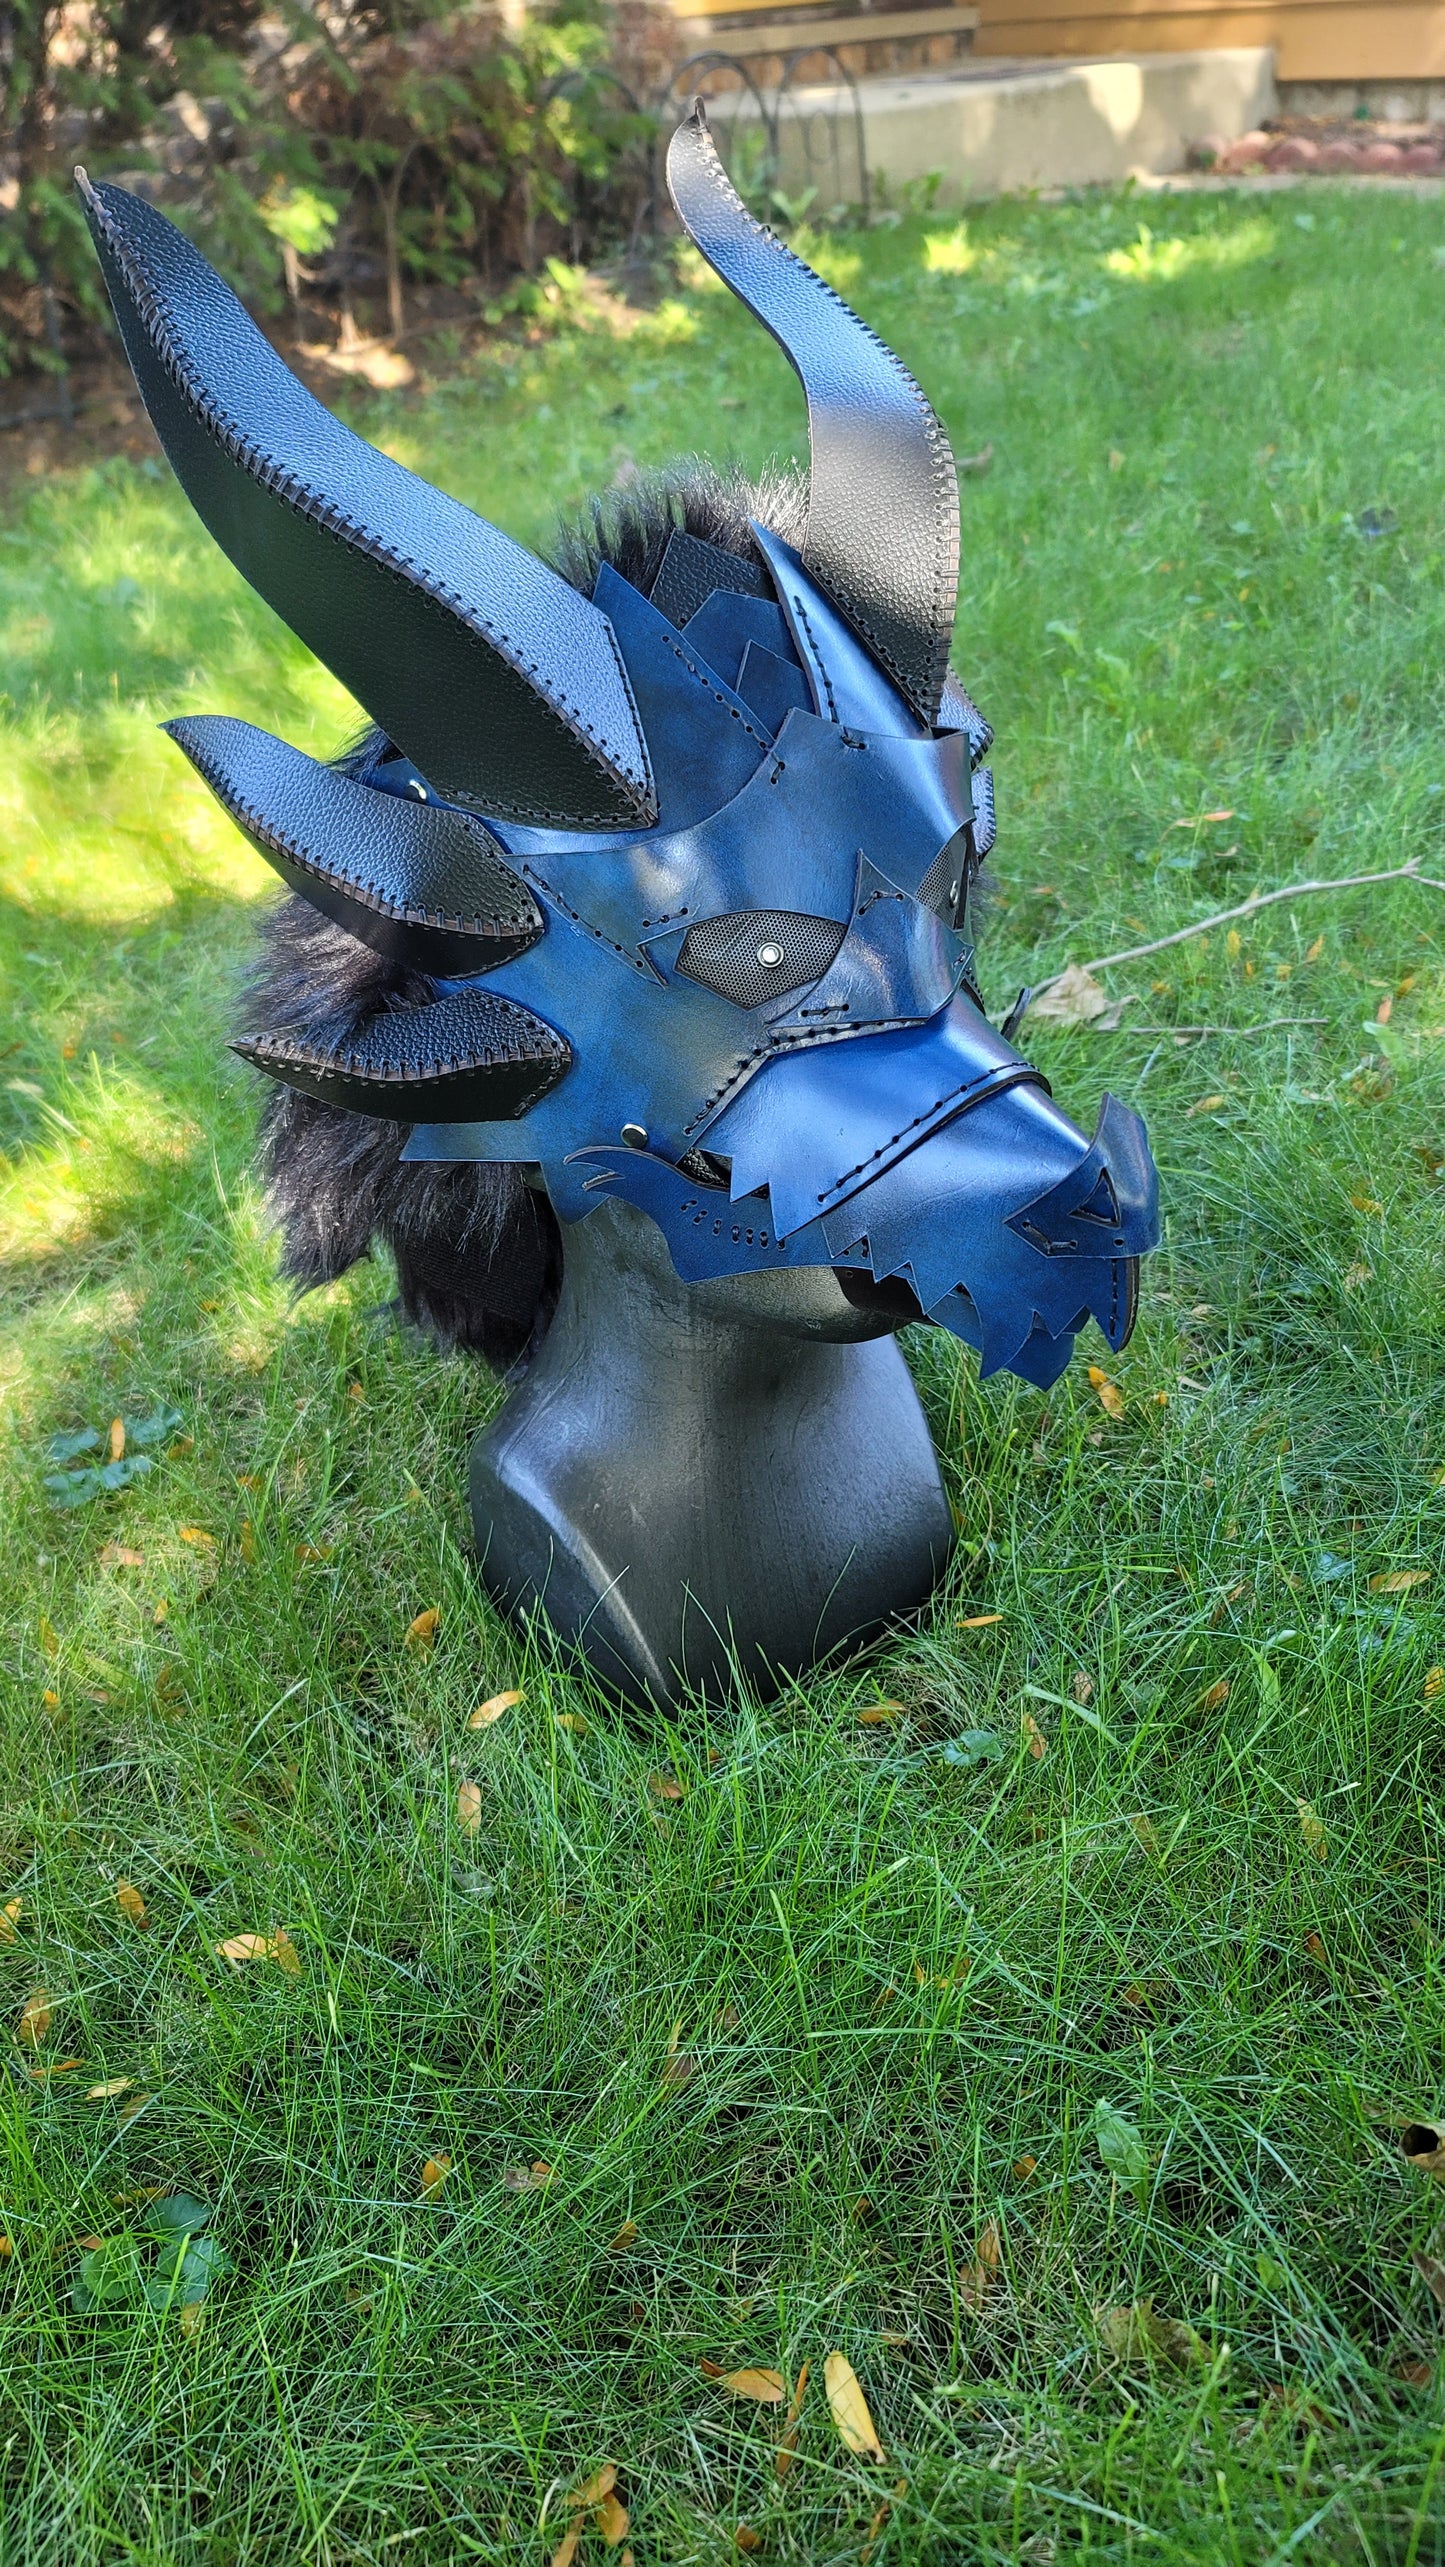 Articulate Spikey Leather Dragon Mask Furry Head Moving Jaw with Glowing Eyes